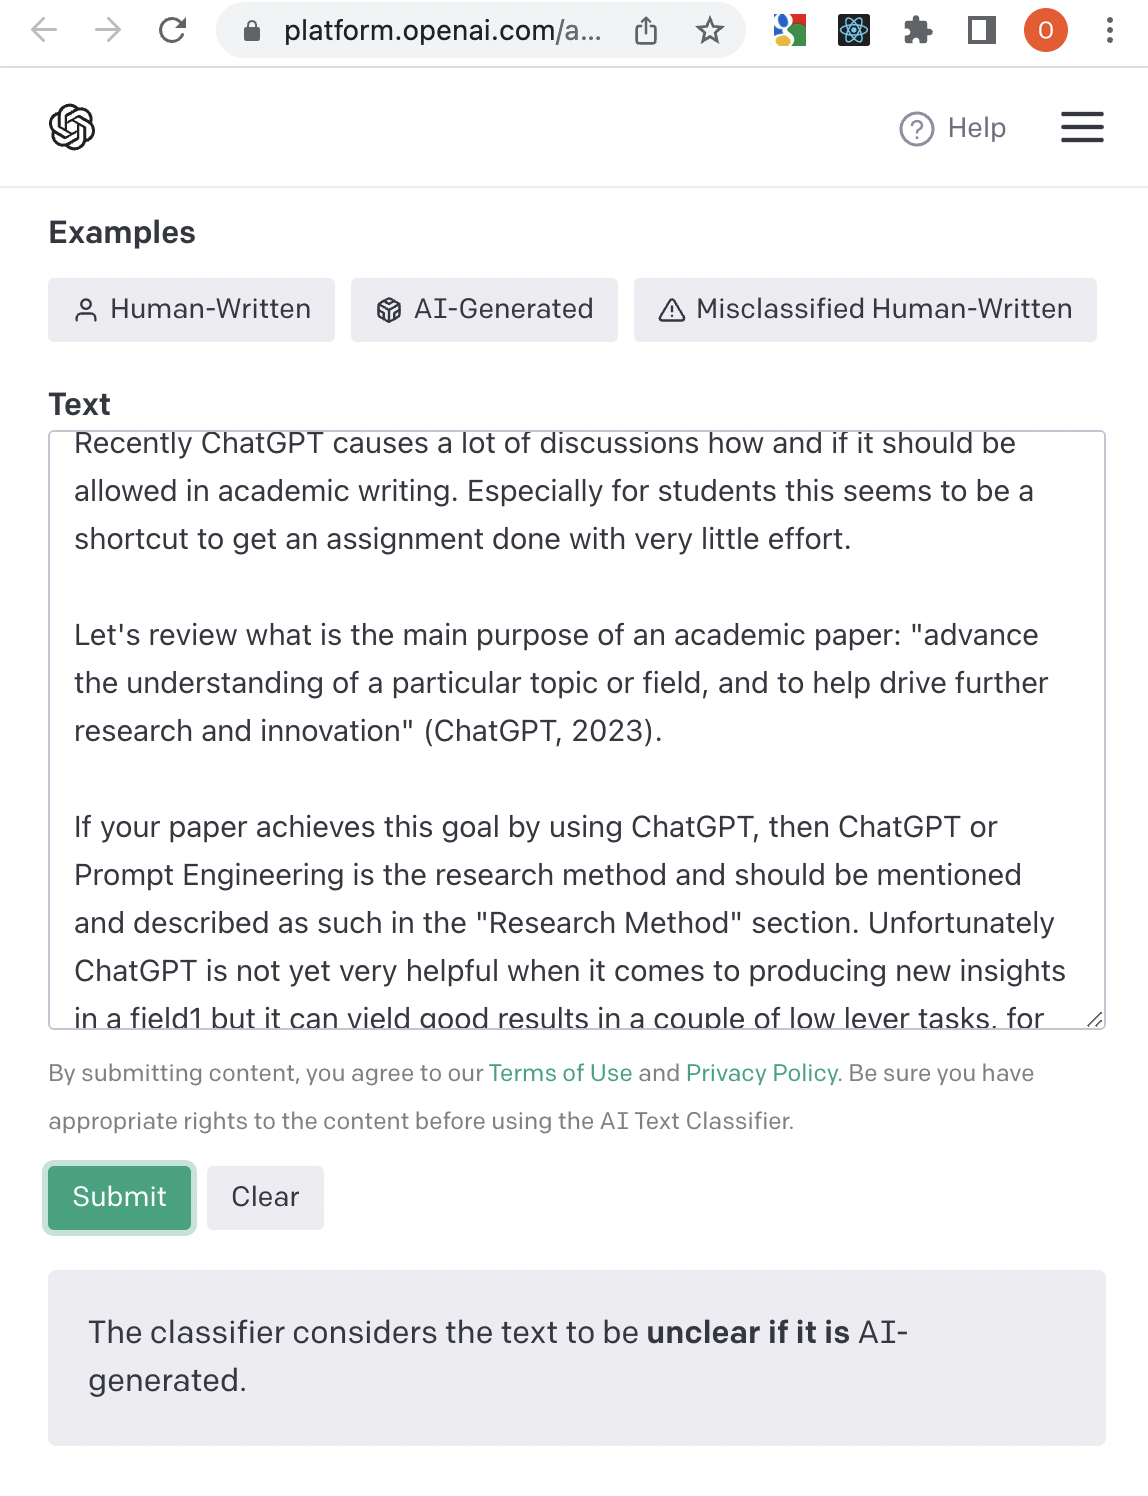 A screenshot of the openAI text classifier to detect text written by AI (ChatGPT, etc..)